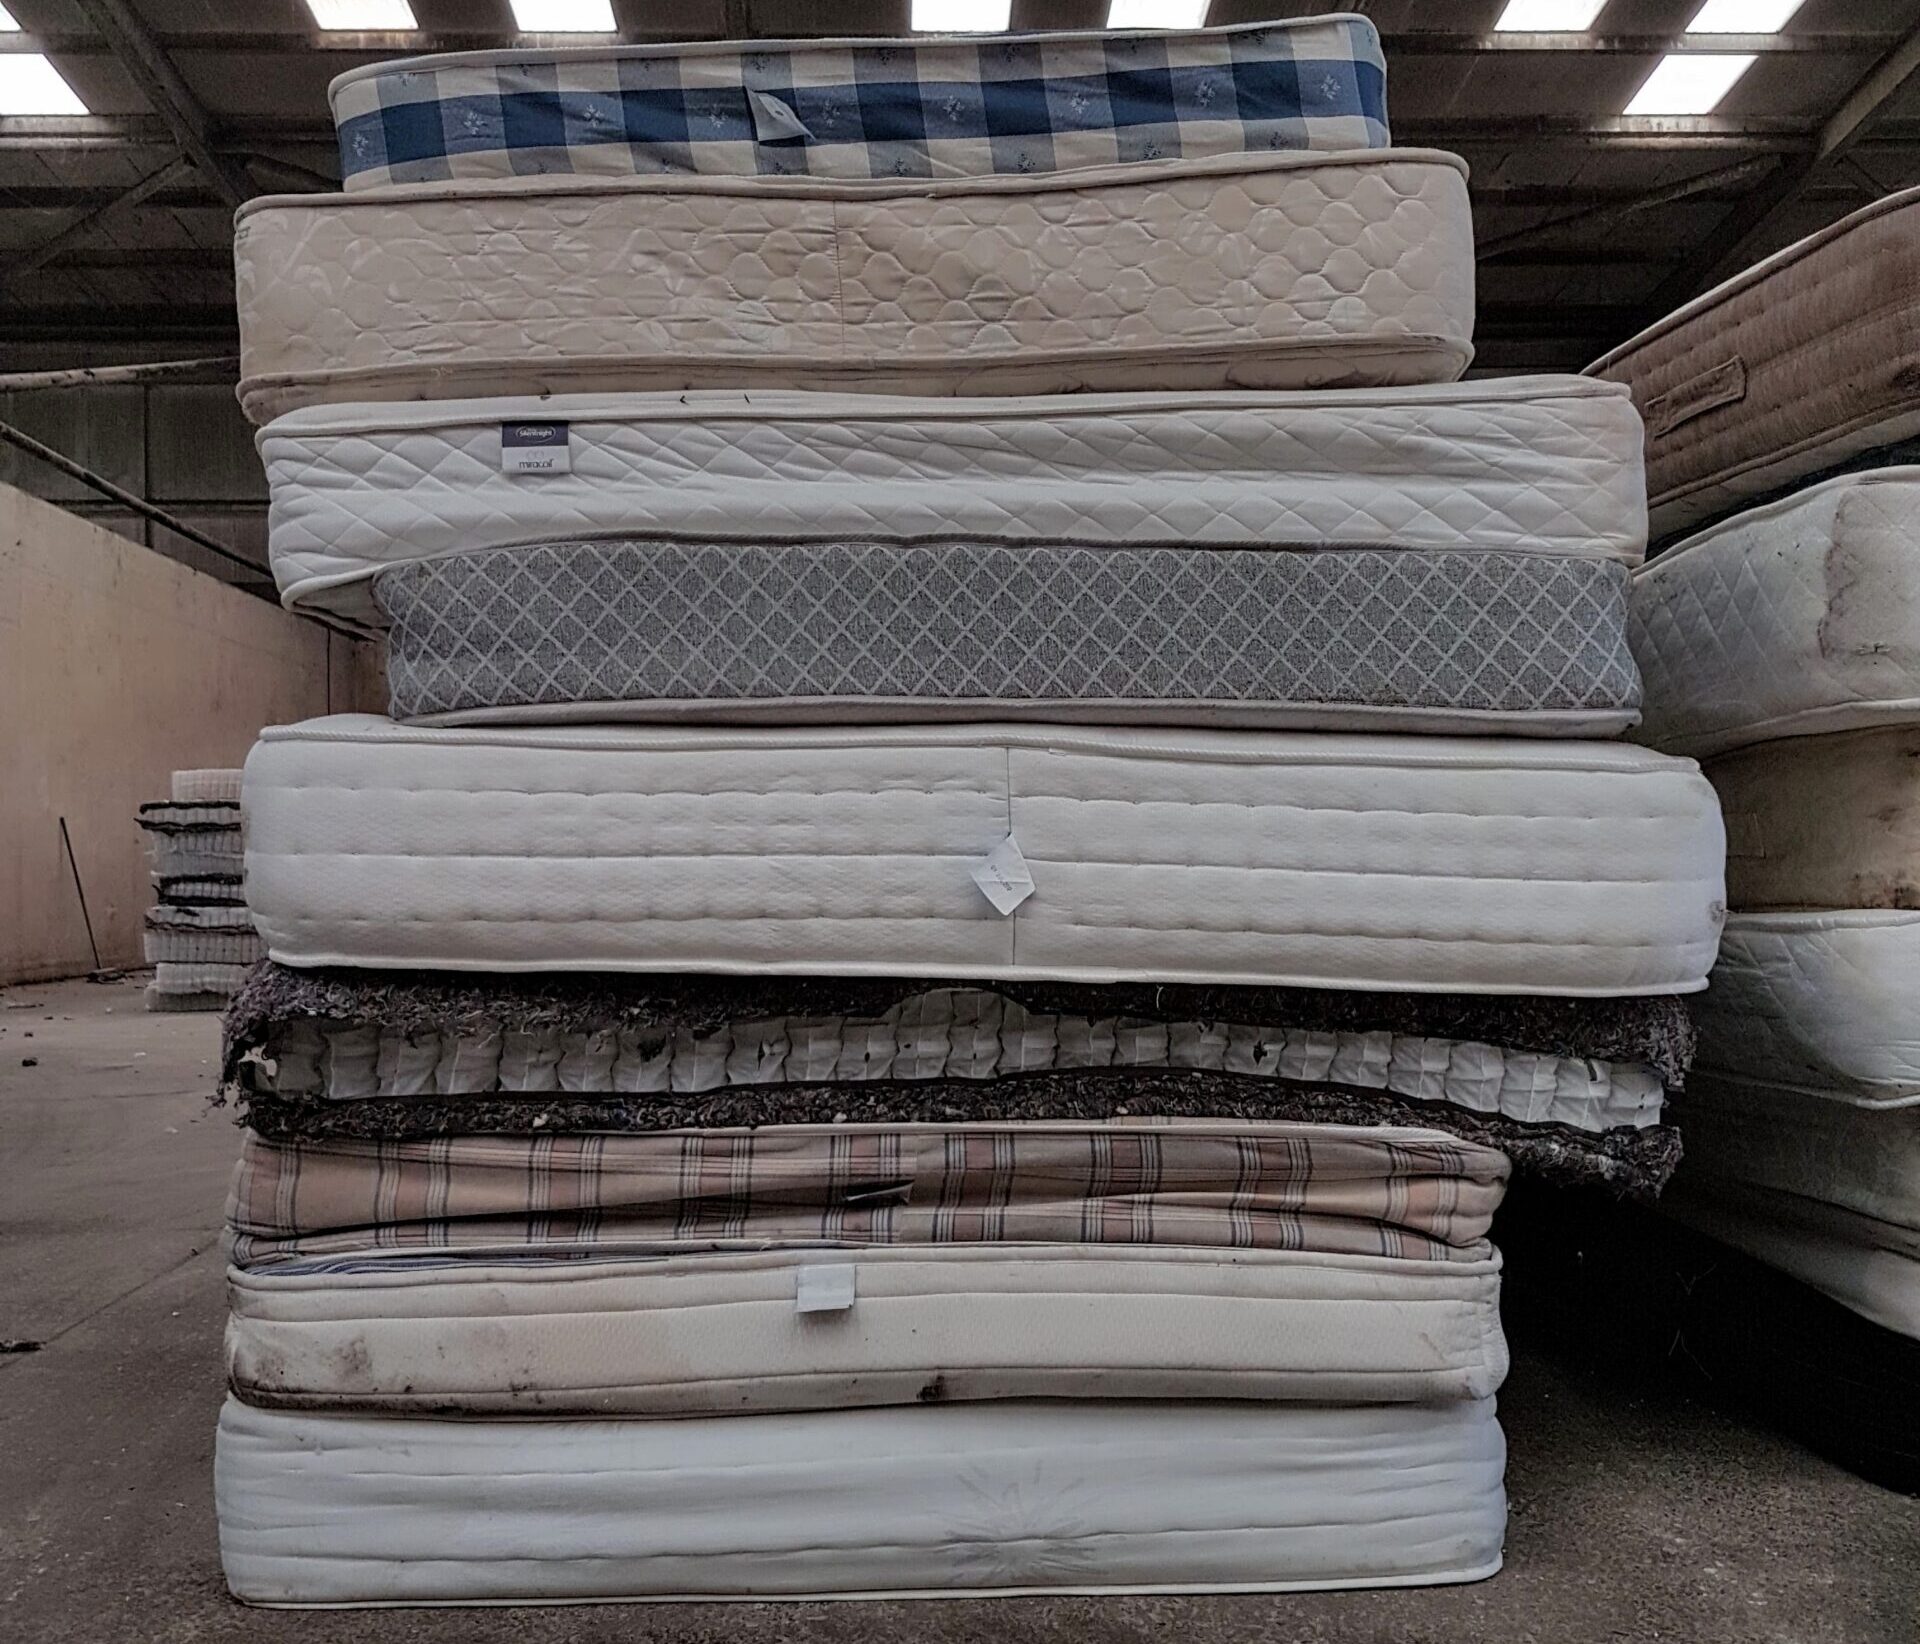 How mattresses are recycled